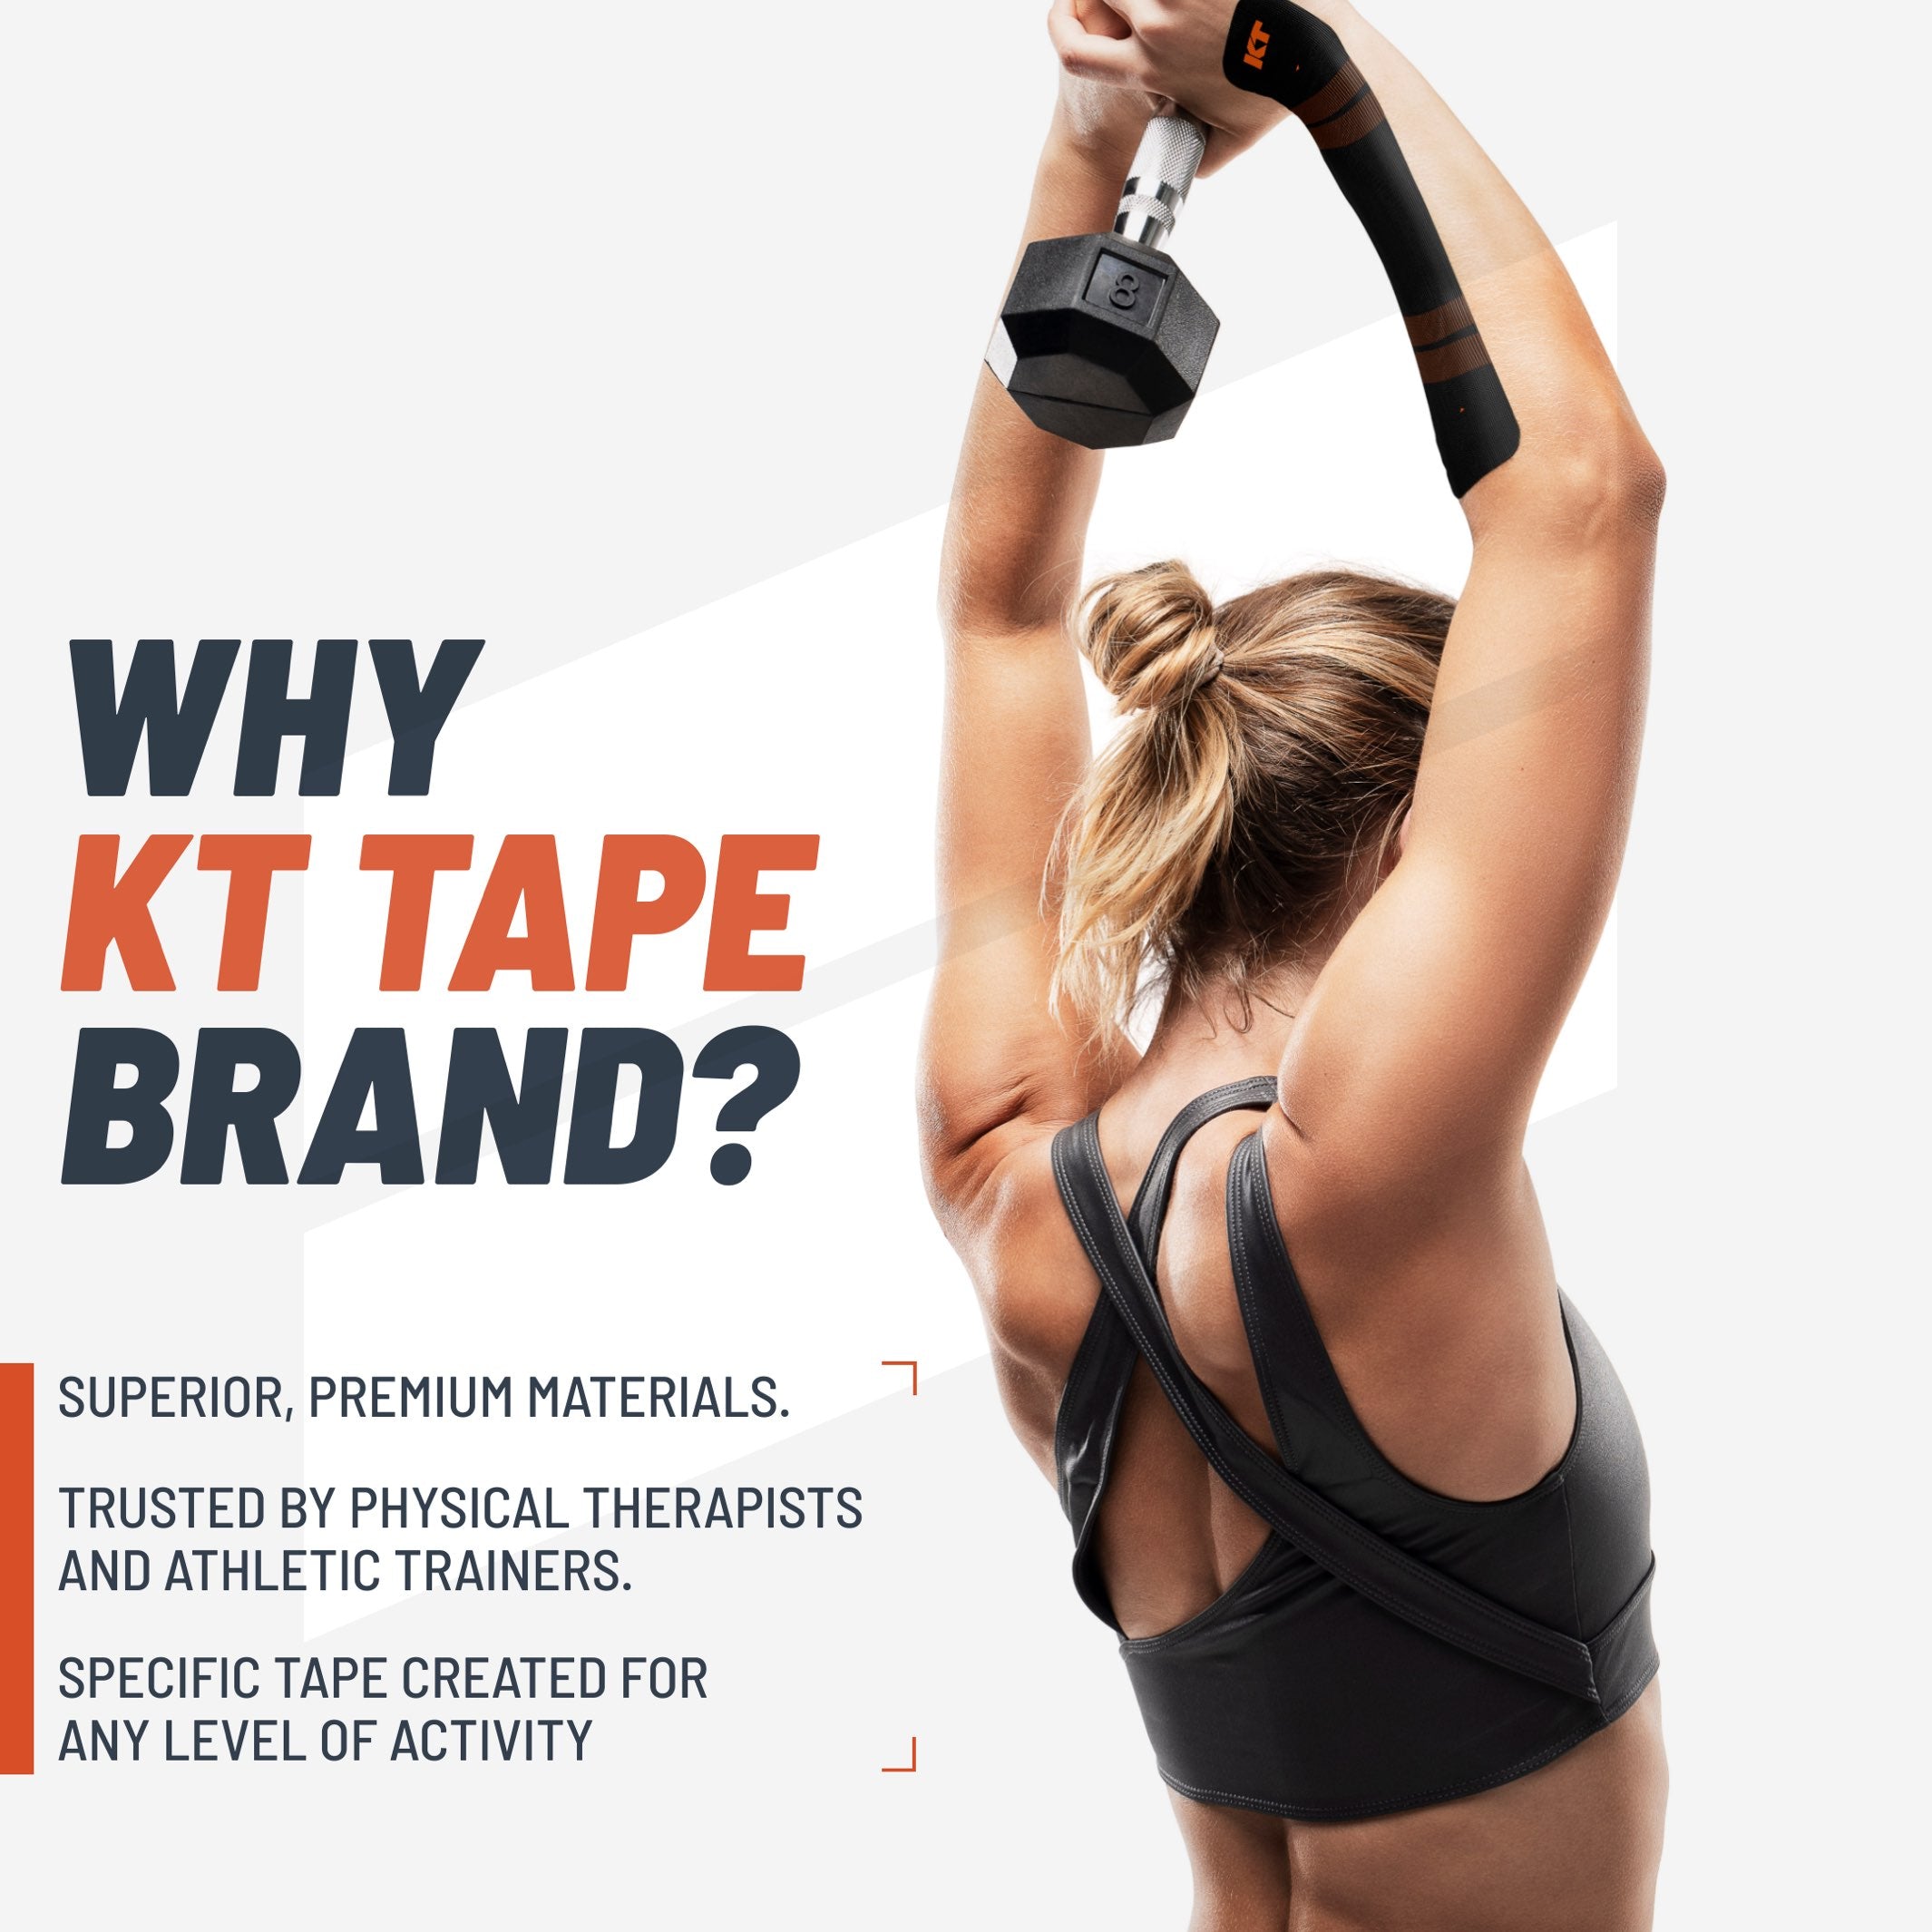 Why KT Tape Brand?